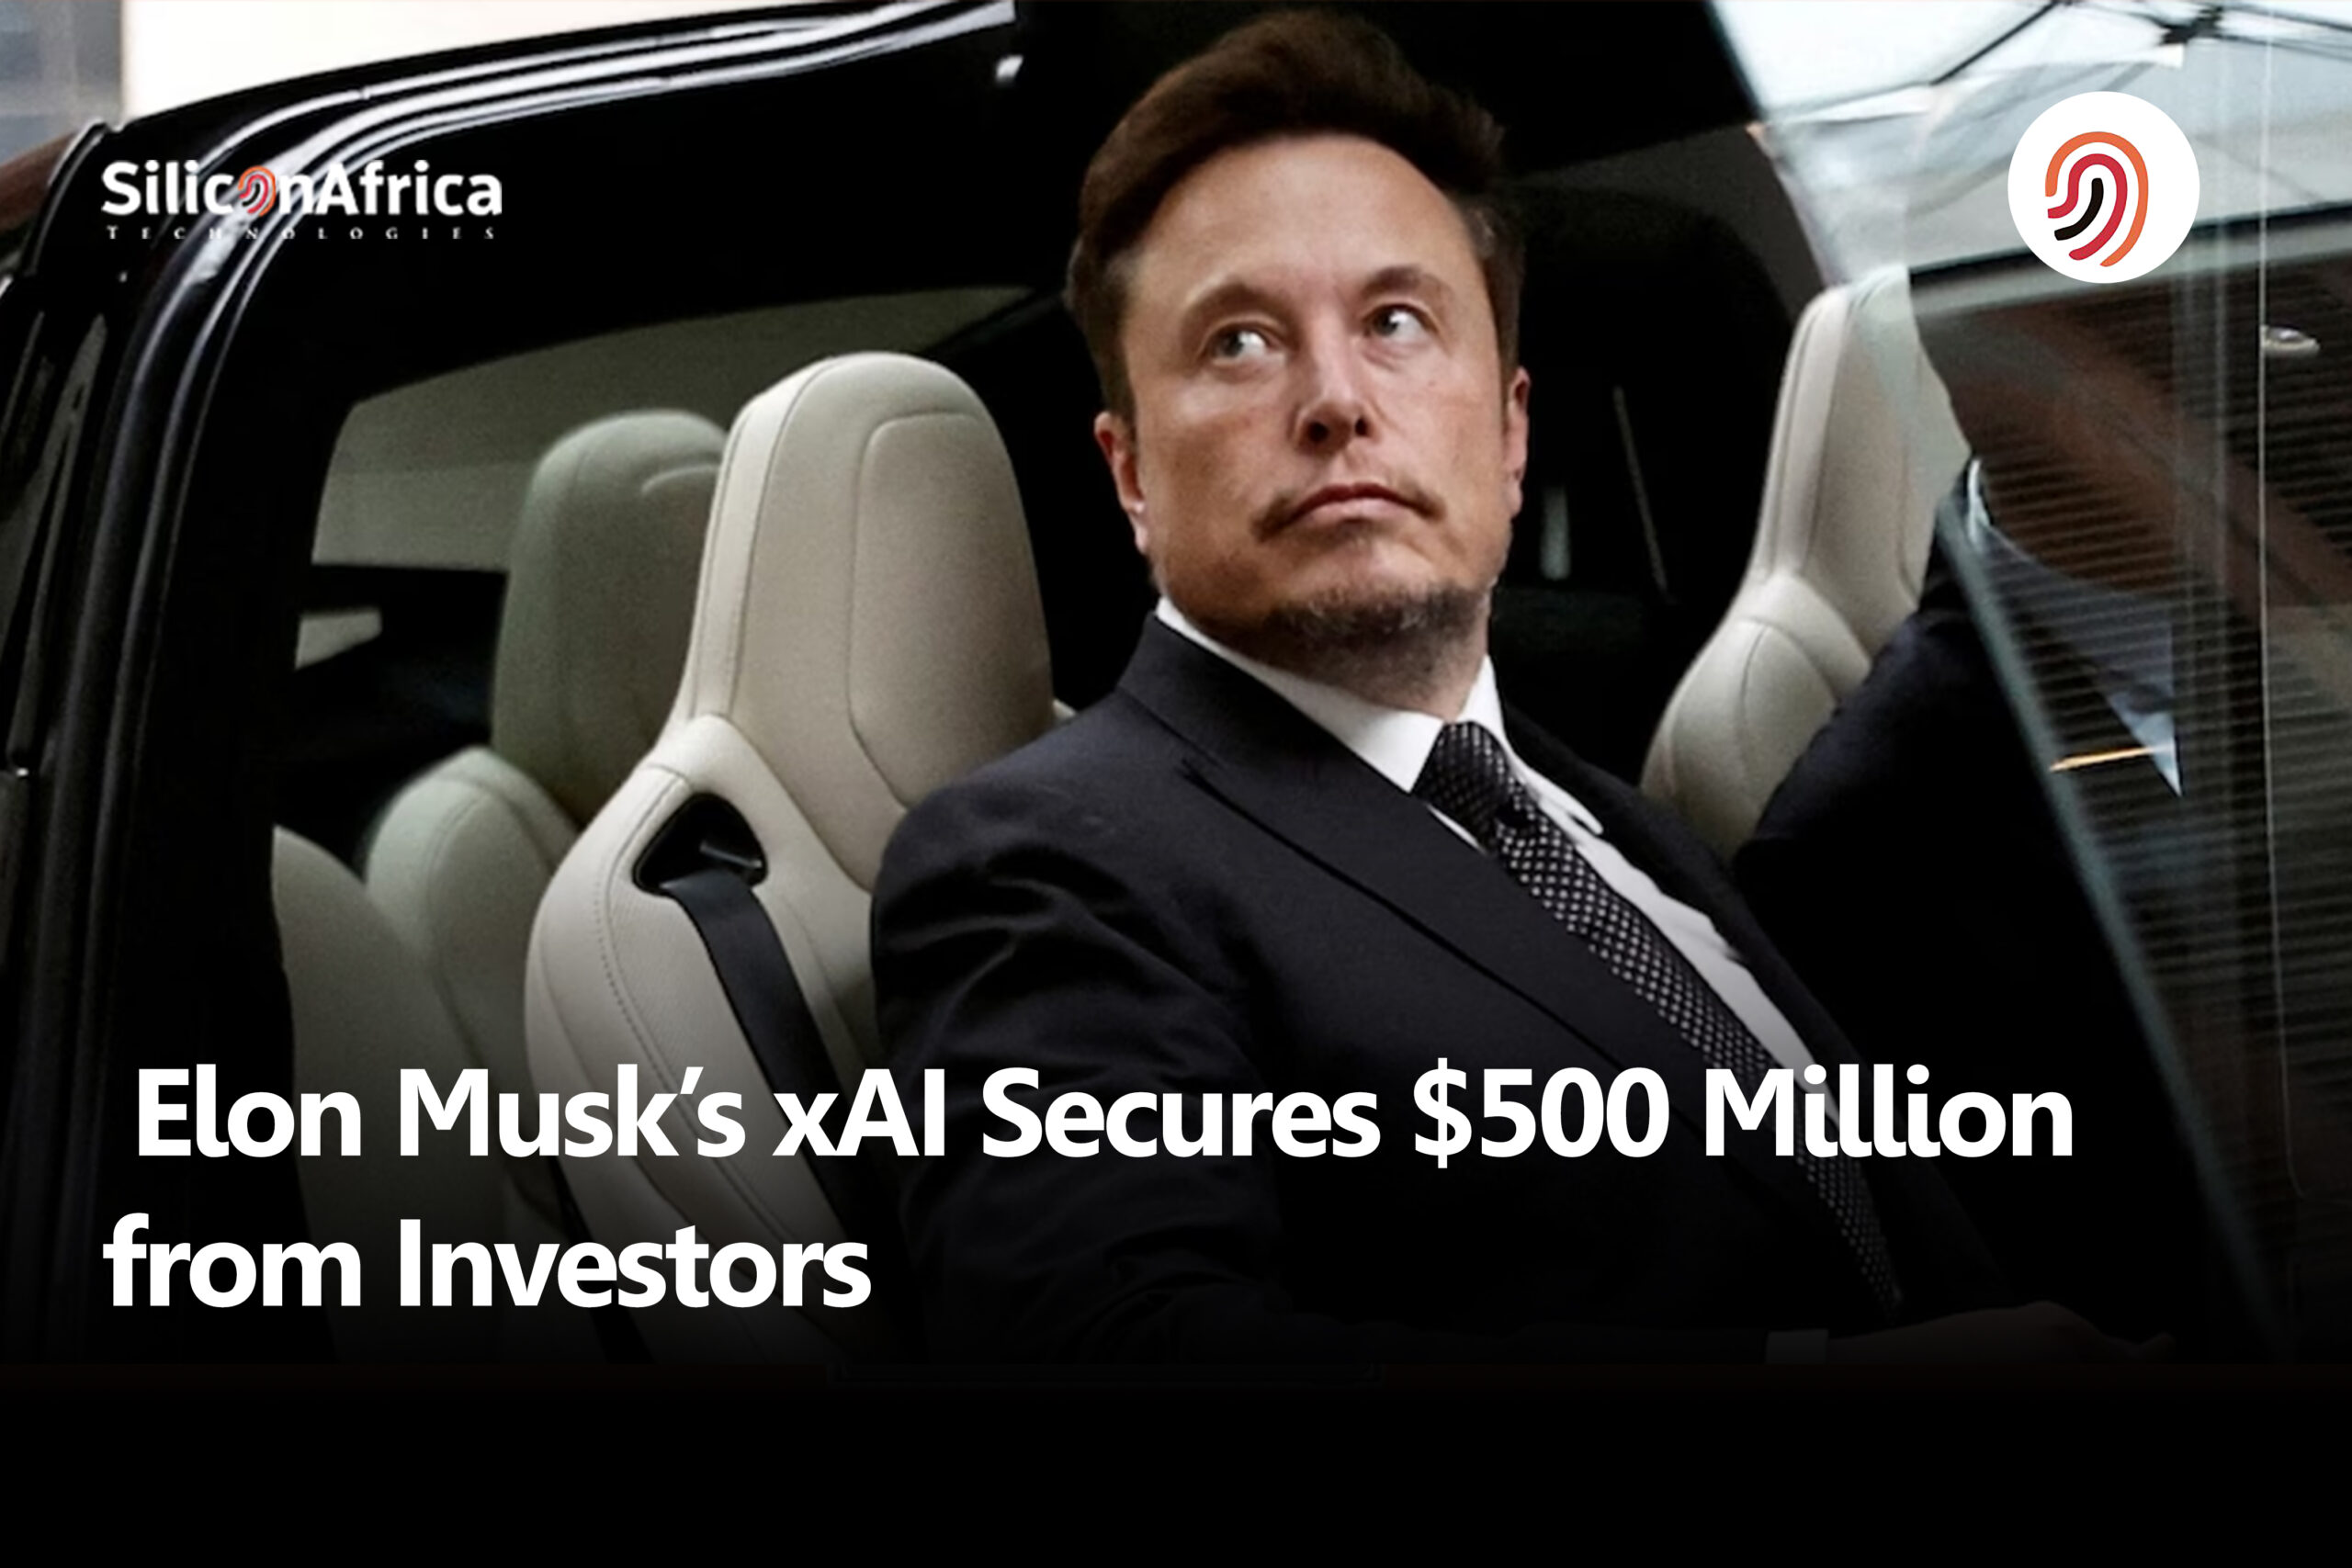 Elon Musk’s xAI Secures $500 Million from Investors